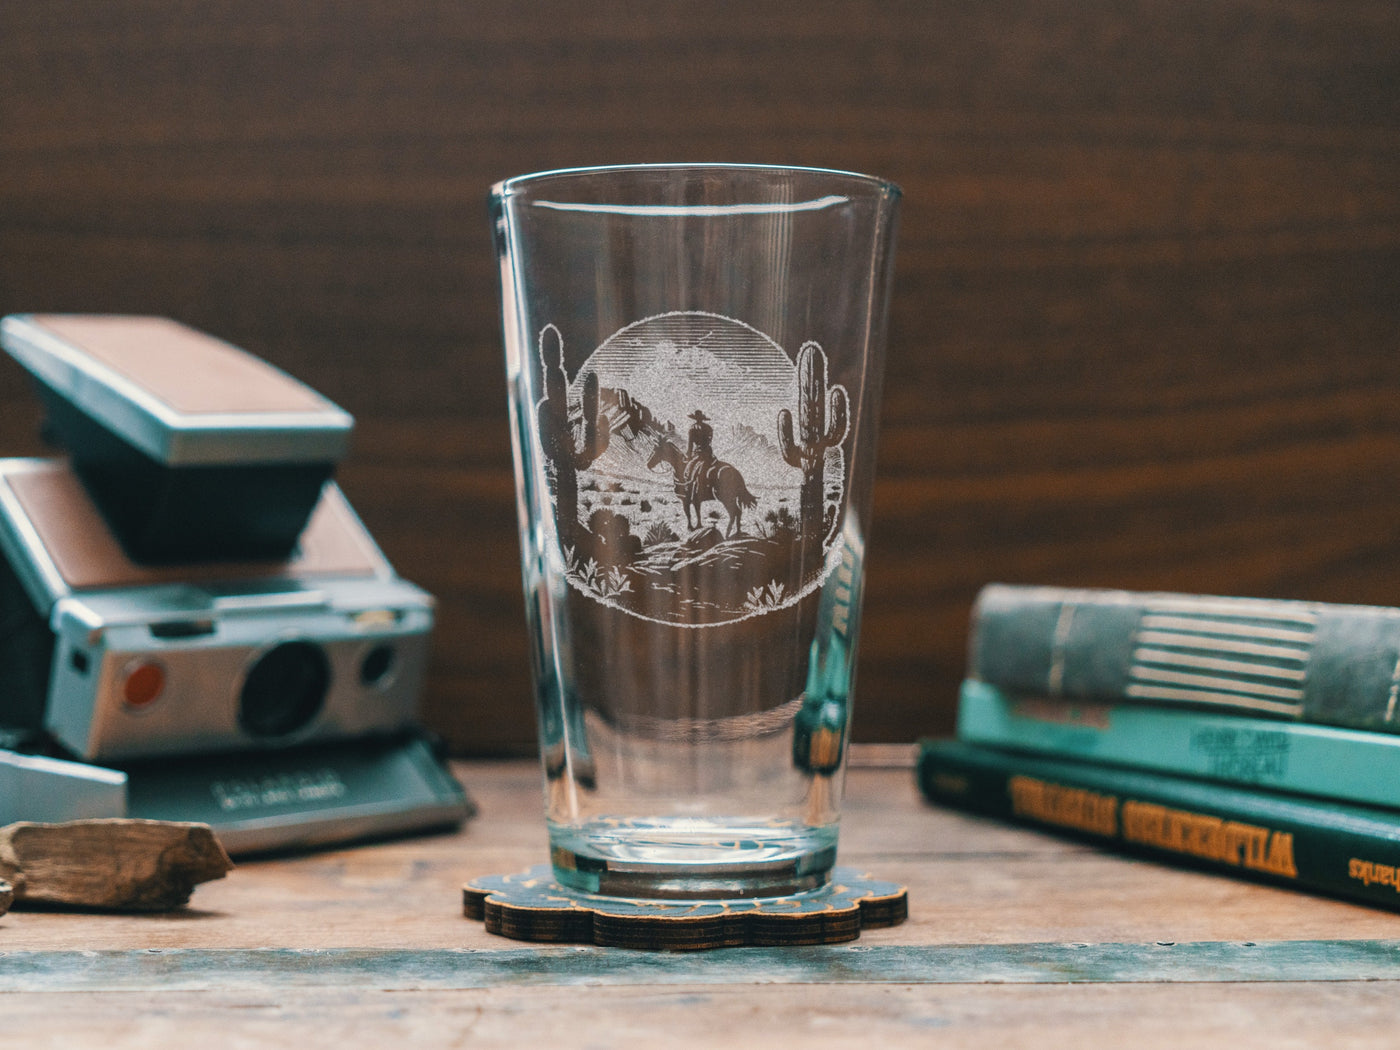 Cowboy on the Range Scene Glasses | Personalized etched glassware for beer, whiskey, wine & cocktails. Western Desert, Southwestern Decor.